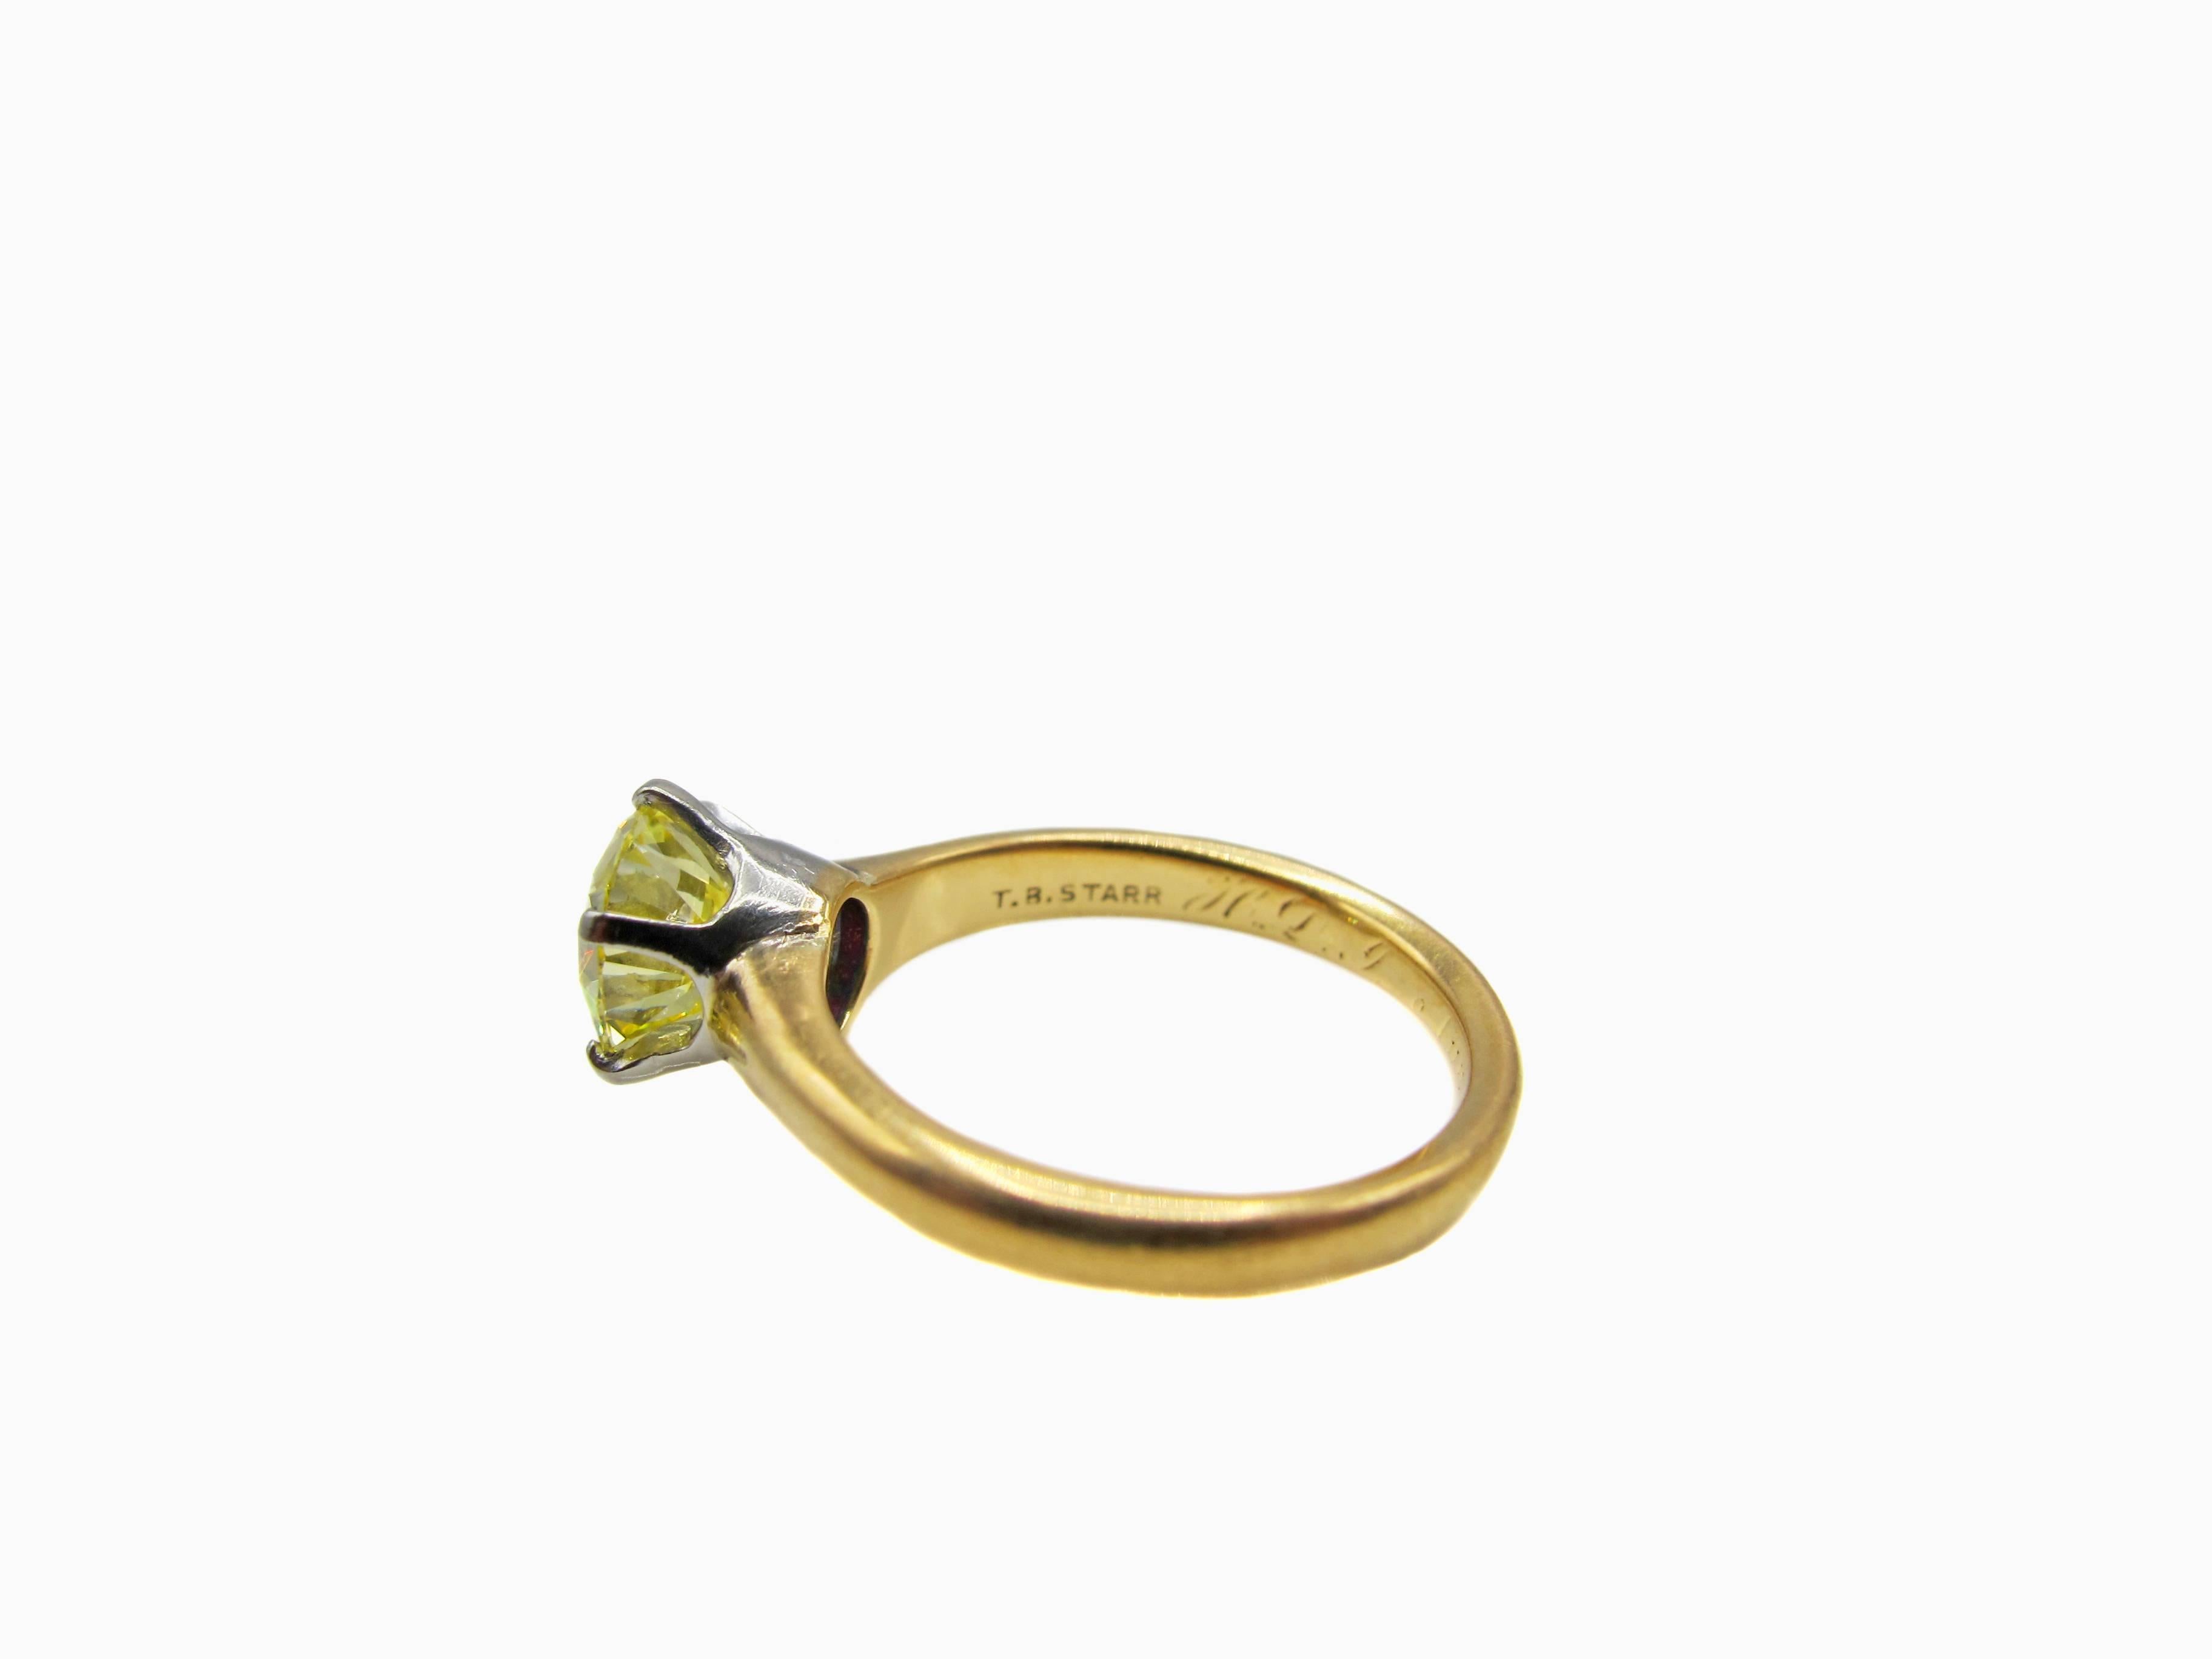 Amazing Canary yellow Old European Cut diamond solitaire ring from ca. 1900 by the famous American Jeweler " T.B. Starr " who later joined the firm Black, Starr & Frost. Held in a cup hand crafted out of platinum and secured by 6